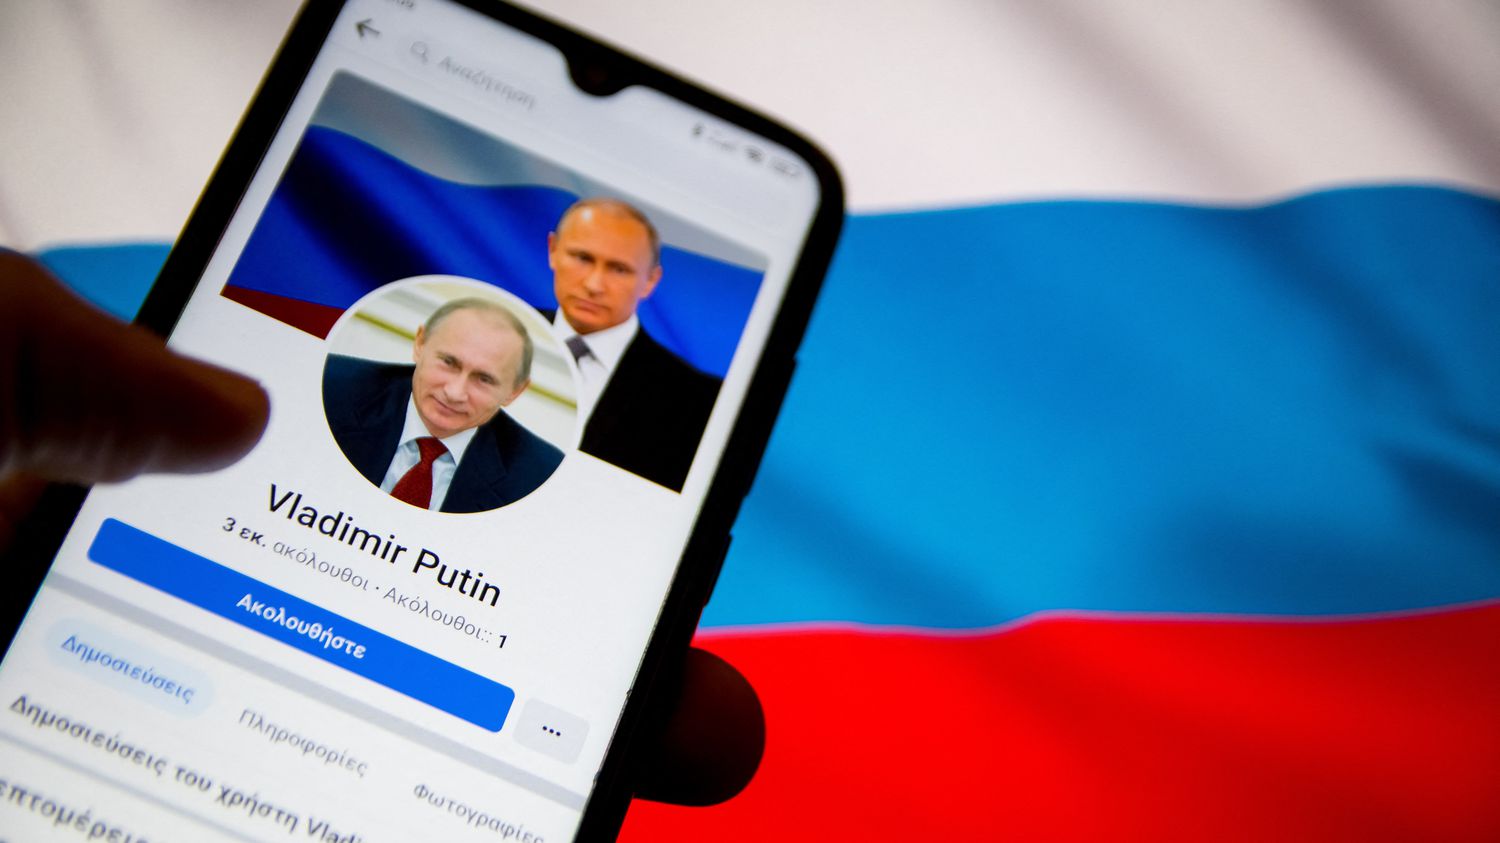 Russia outlaws Facebook, Instagram after labeling Meta an “extremist organization”